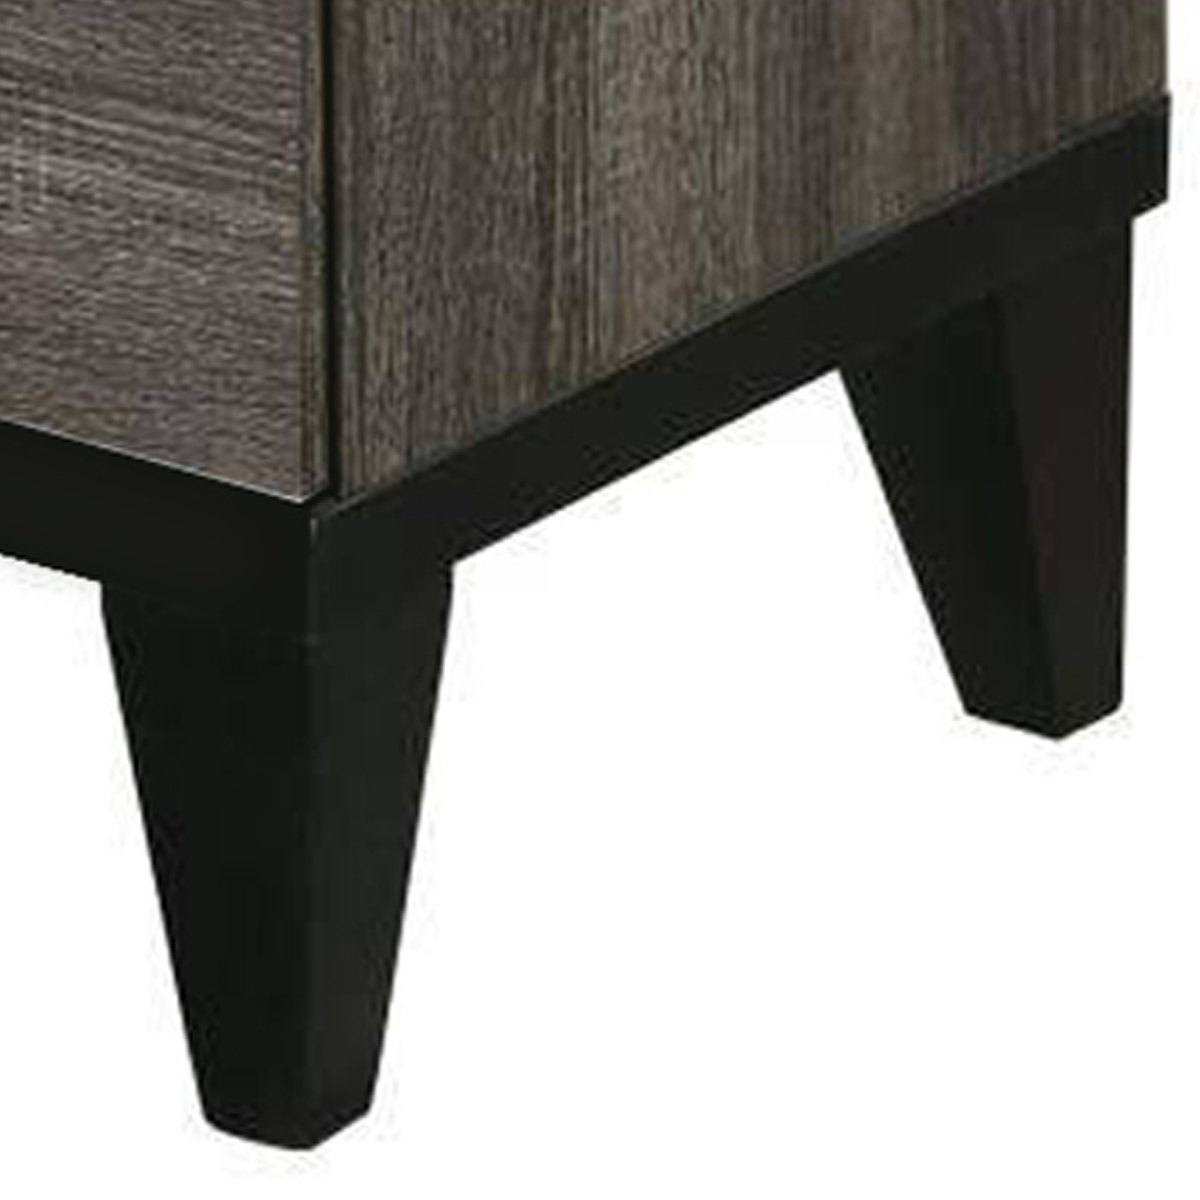 2 Drawer Wooden Nightstand With Grains And Angled Legs, Gray- Saltoro Sherpi